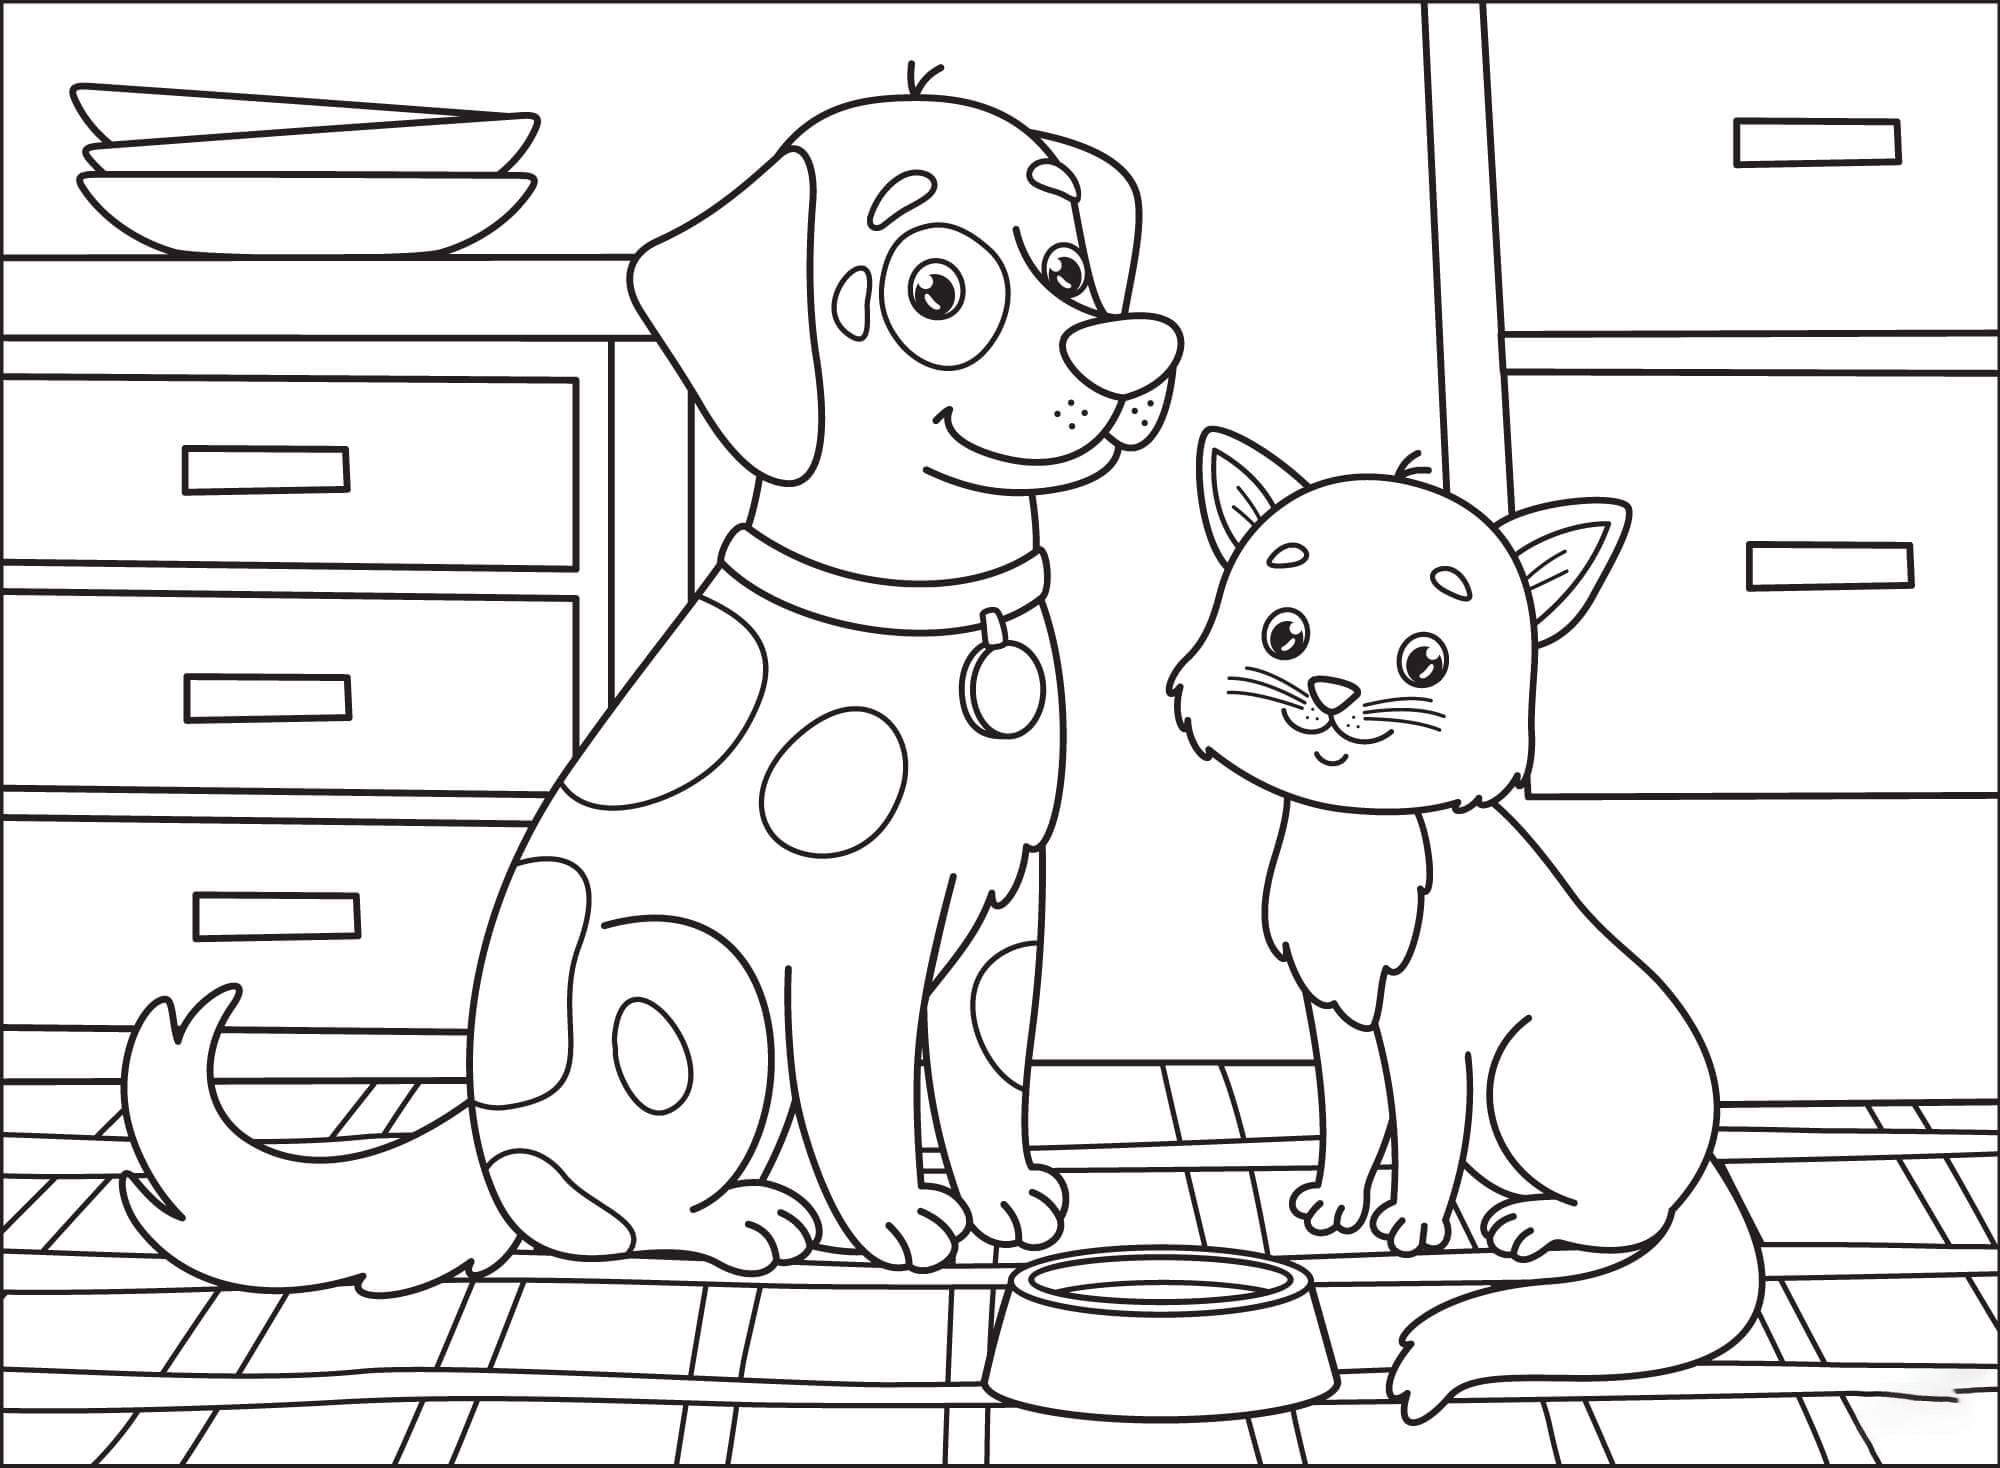 Dog Coloring Pages - Coloring Pages For Kids And Adults